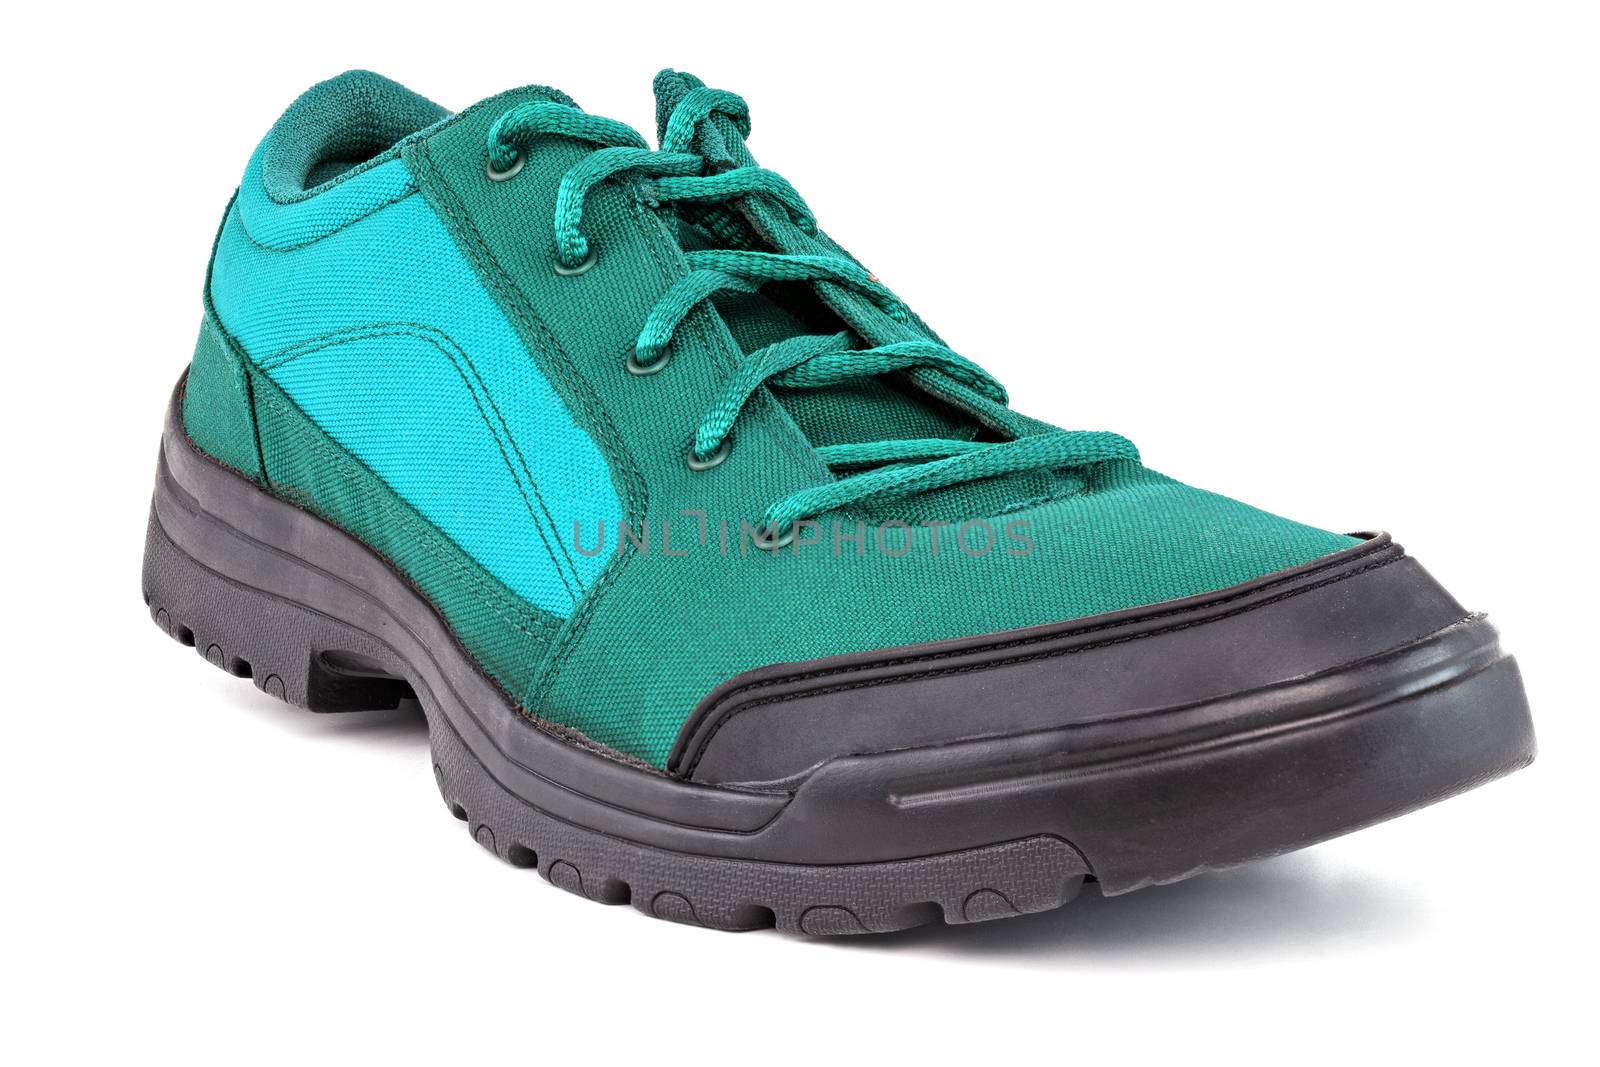 right cheap aqua mint turquoise green hiking or hunting shoe isolated on white background - perspective close-up view by z1b